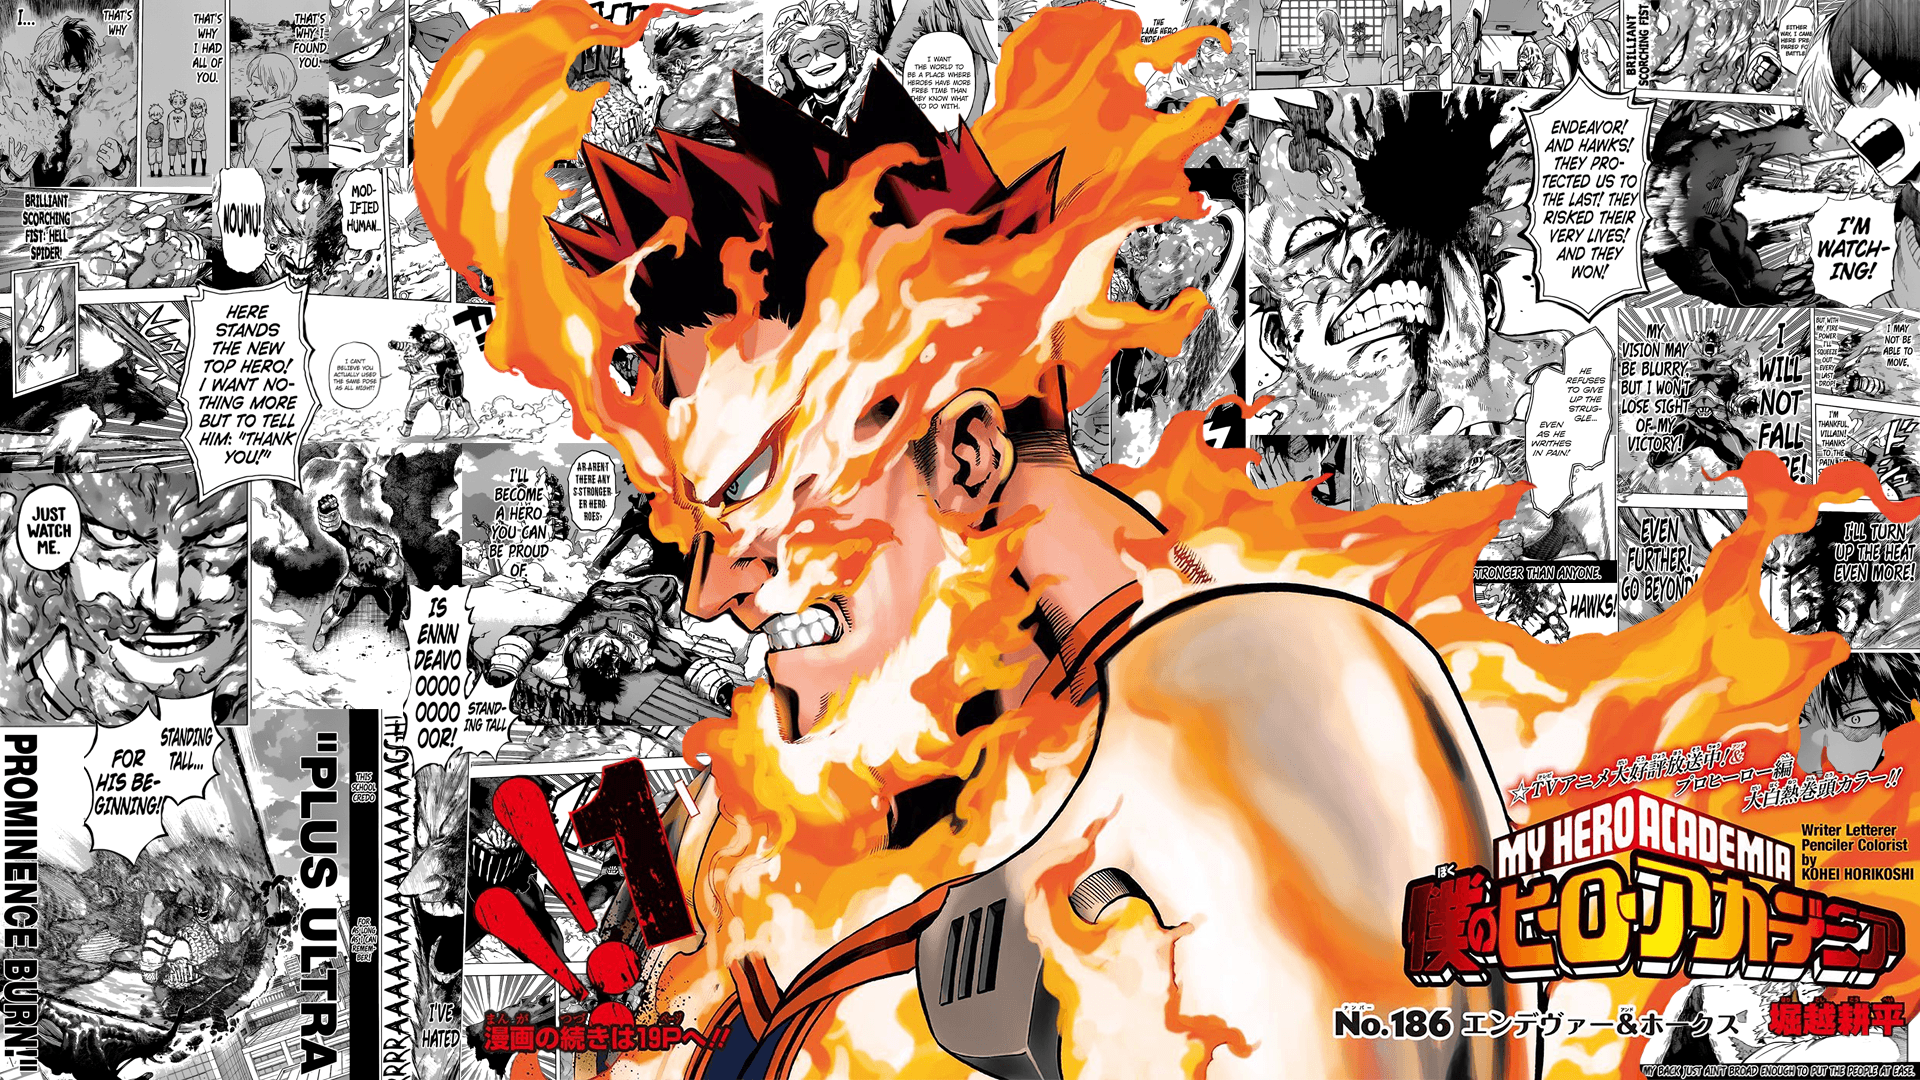 Made this Endeavor wallpaper a few weeks back, tell me what you guys think! Warning Manga Spoilers!